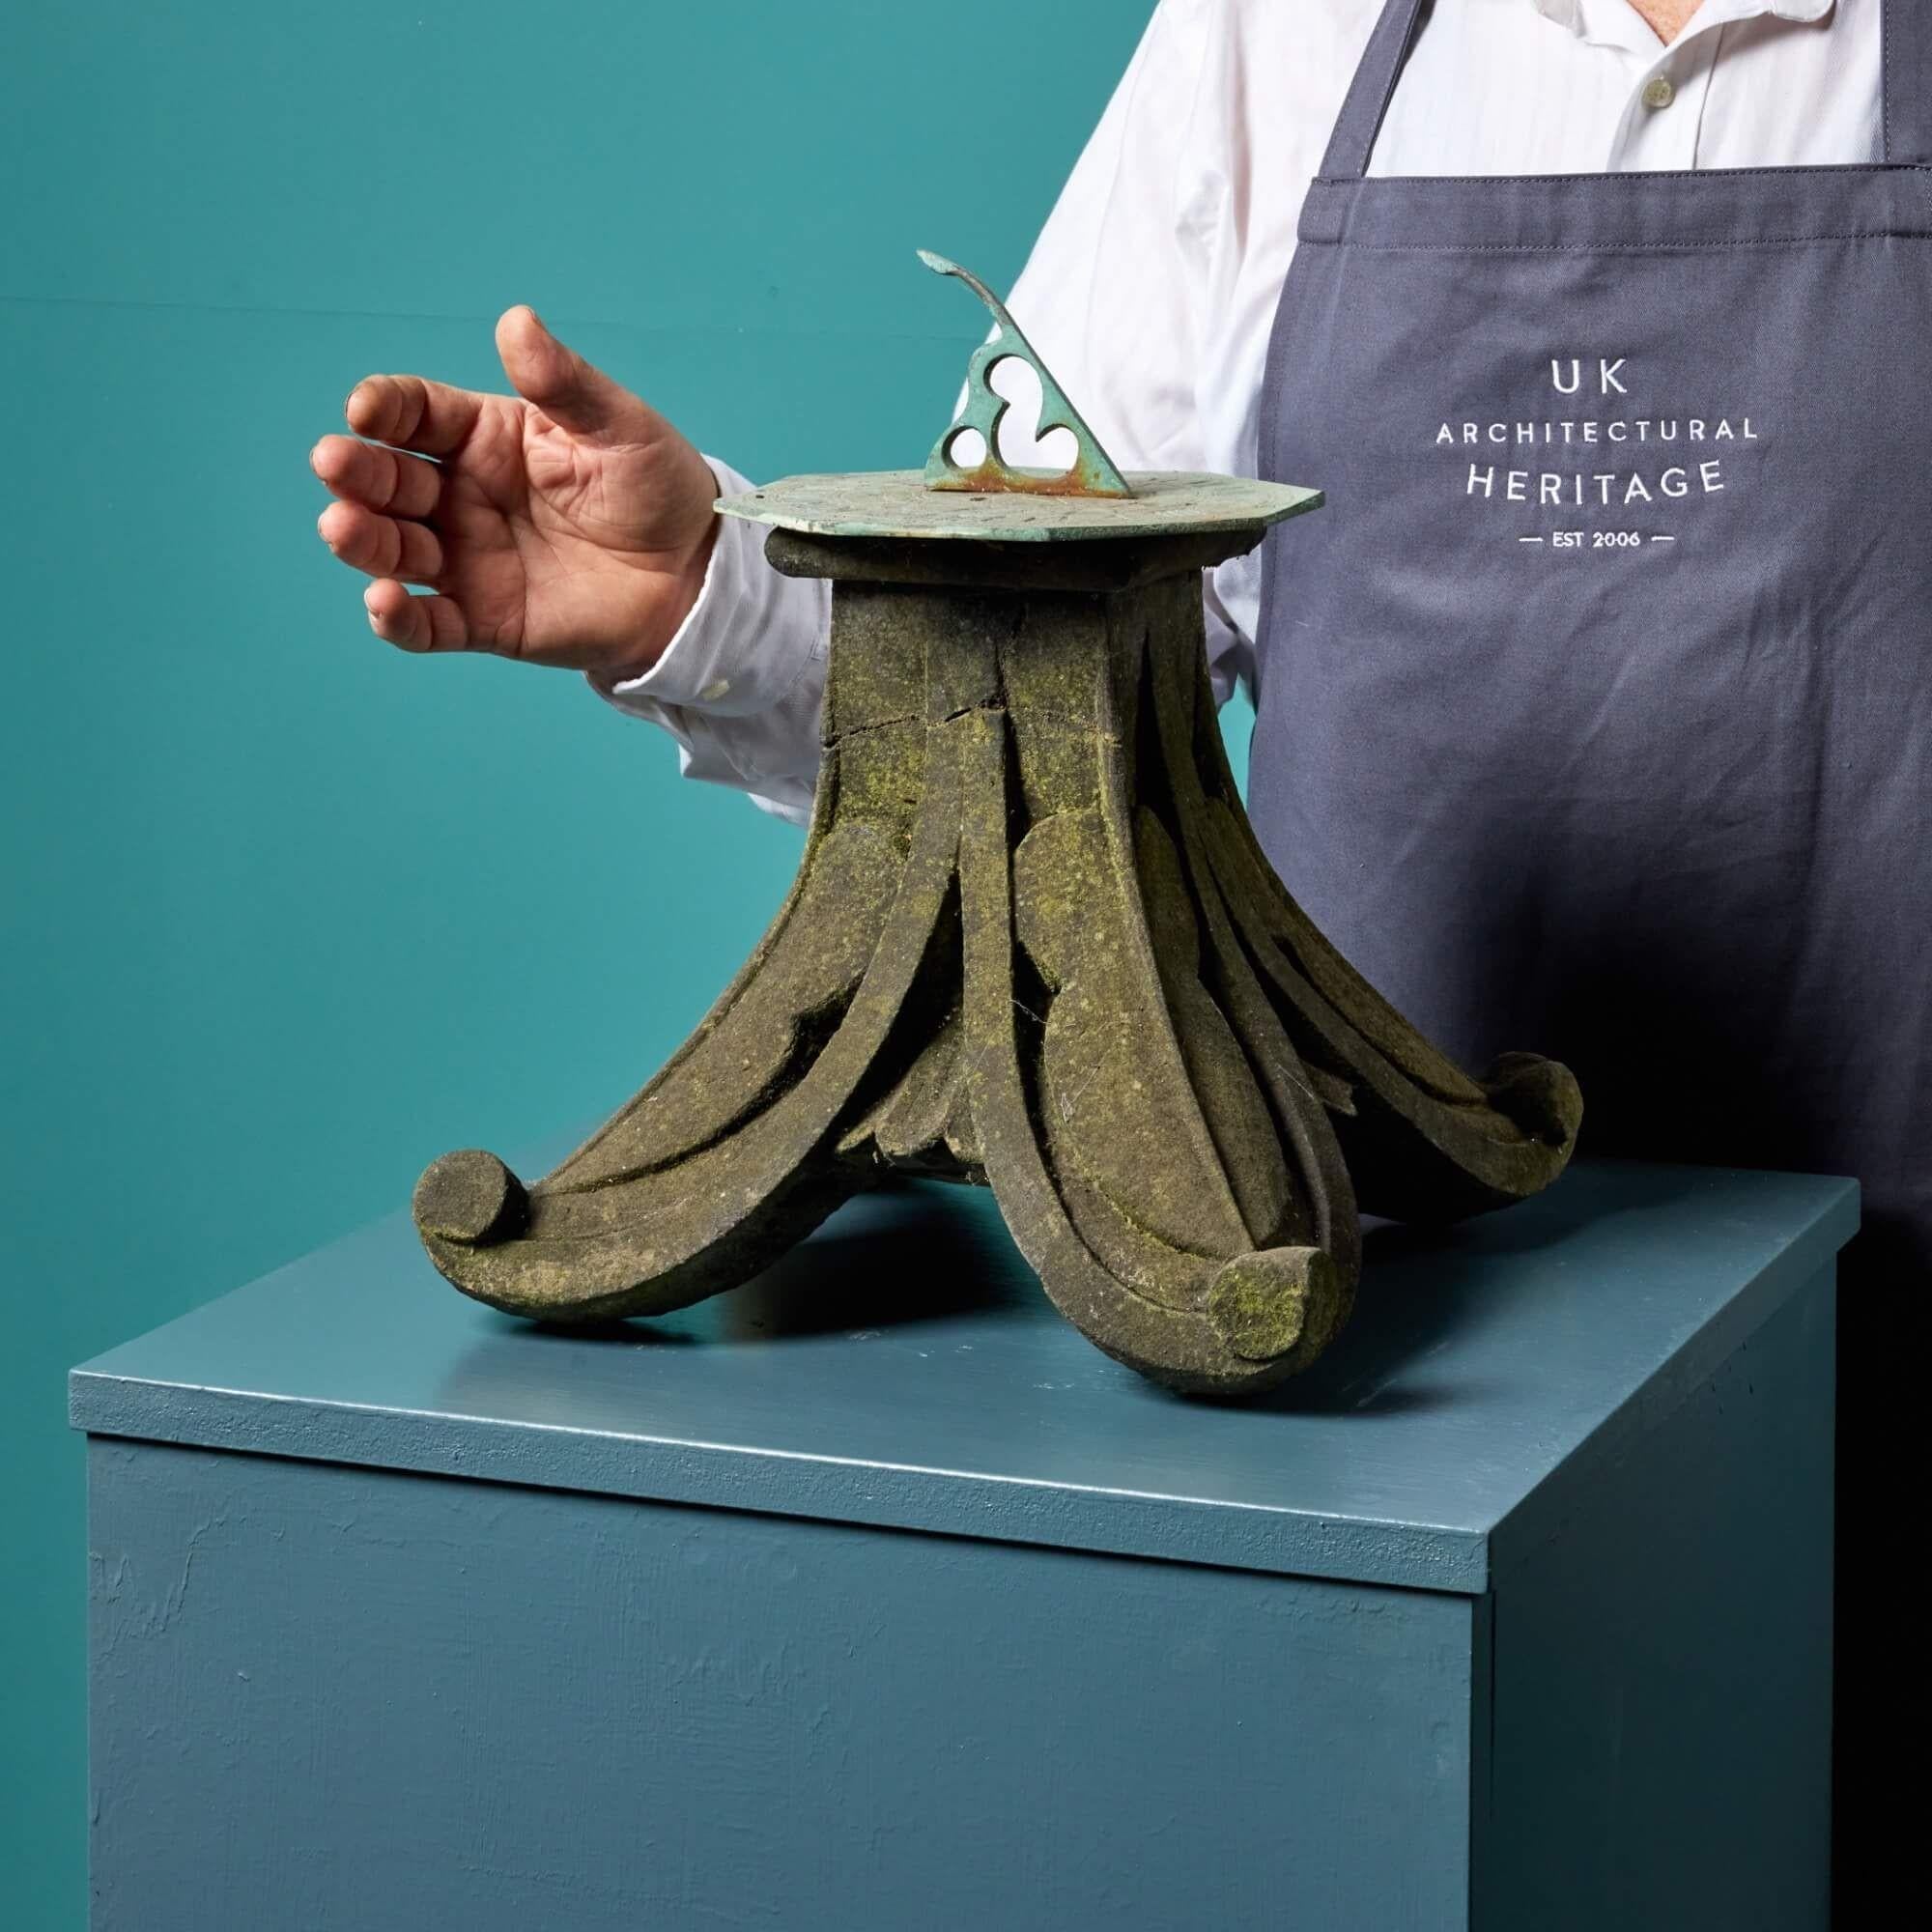 Dating from the early 20th century, this small tabletop antique garden sundial sees a stylistically carved York stone base below a later horizontal bronze sundial. It is a beautiful garden ornament for a small outdoor setting or a quiet sunlit